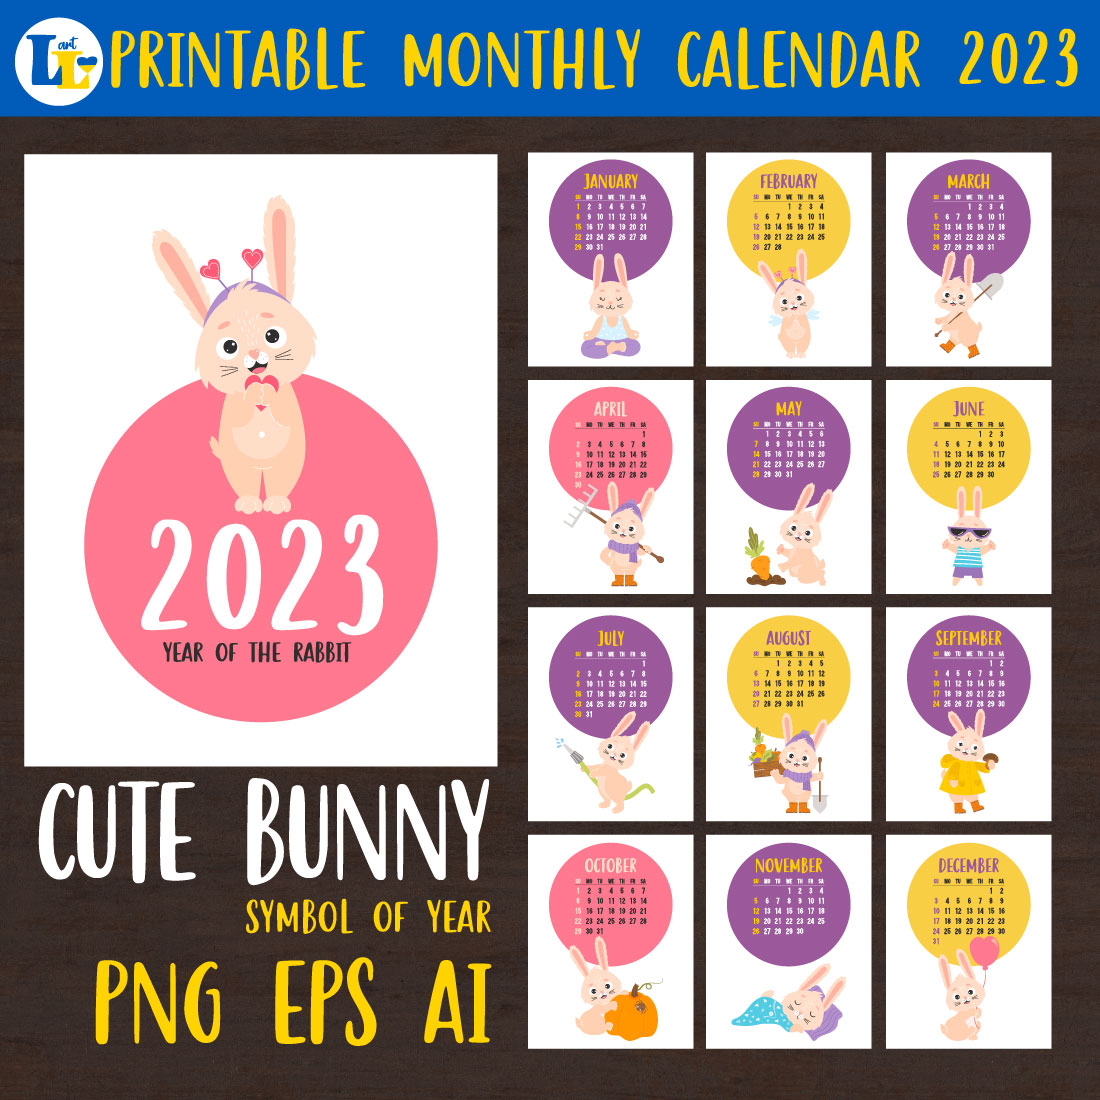 Printable Calendar 2023 with Cute Bunny cover image.